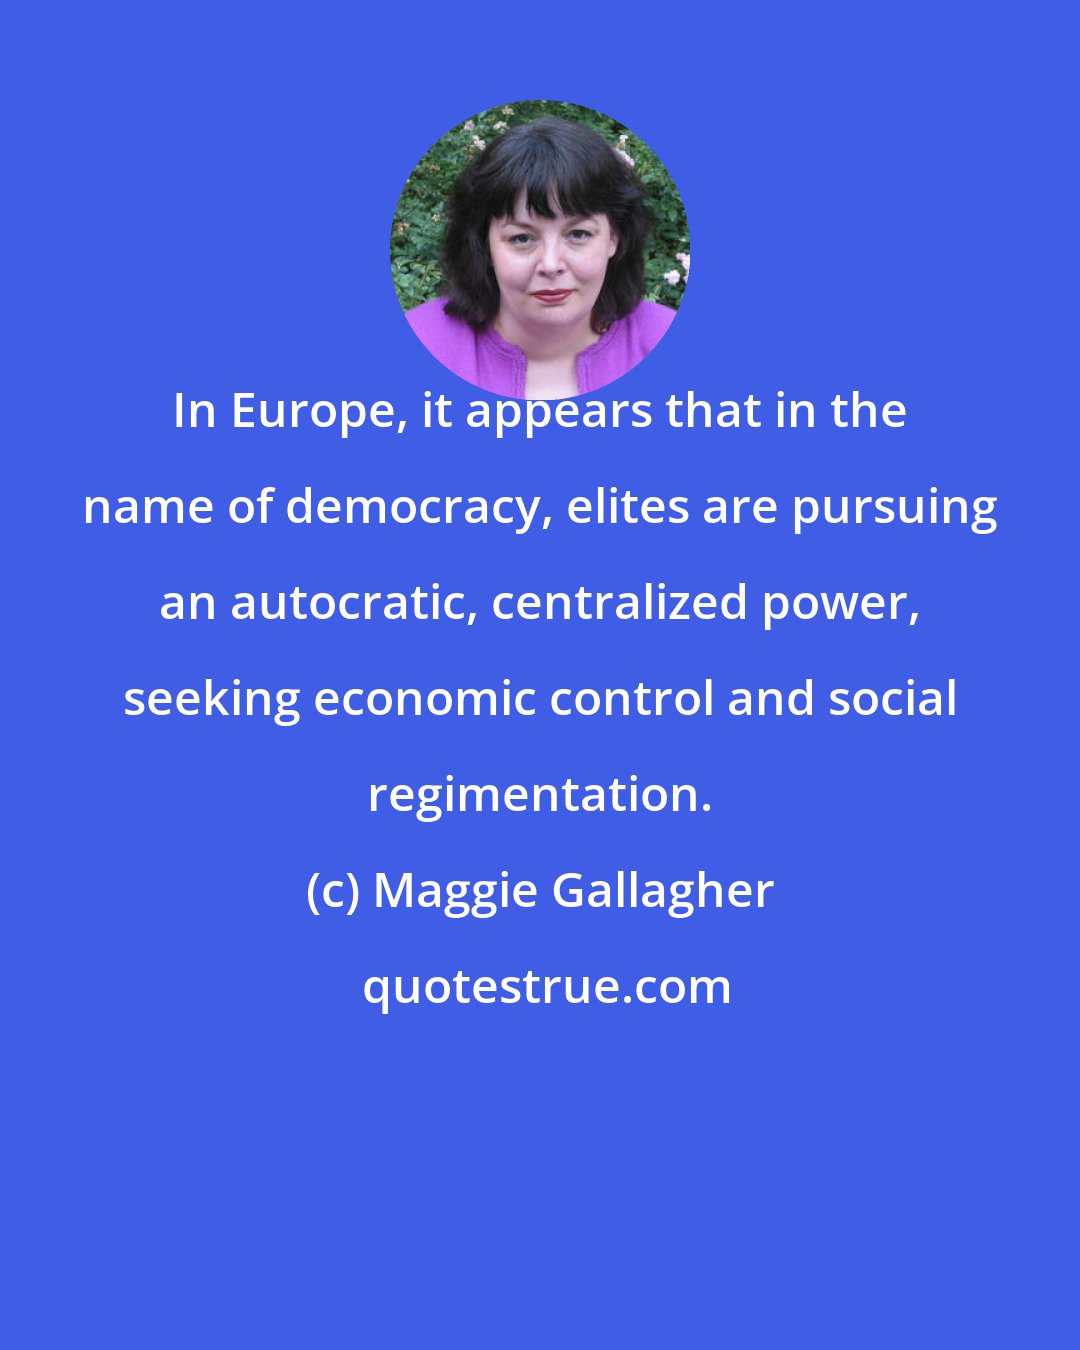 Maggie Gallagher: In Europe, it appears that in the name of democracy, elites are pursuing an autocratic, centralized power, seeking economic control and social regimentation.